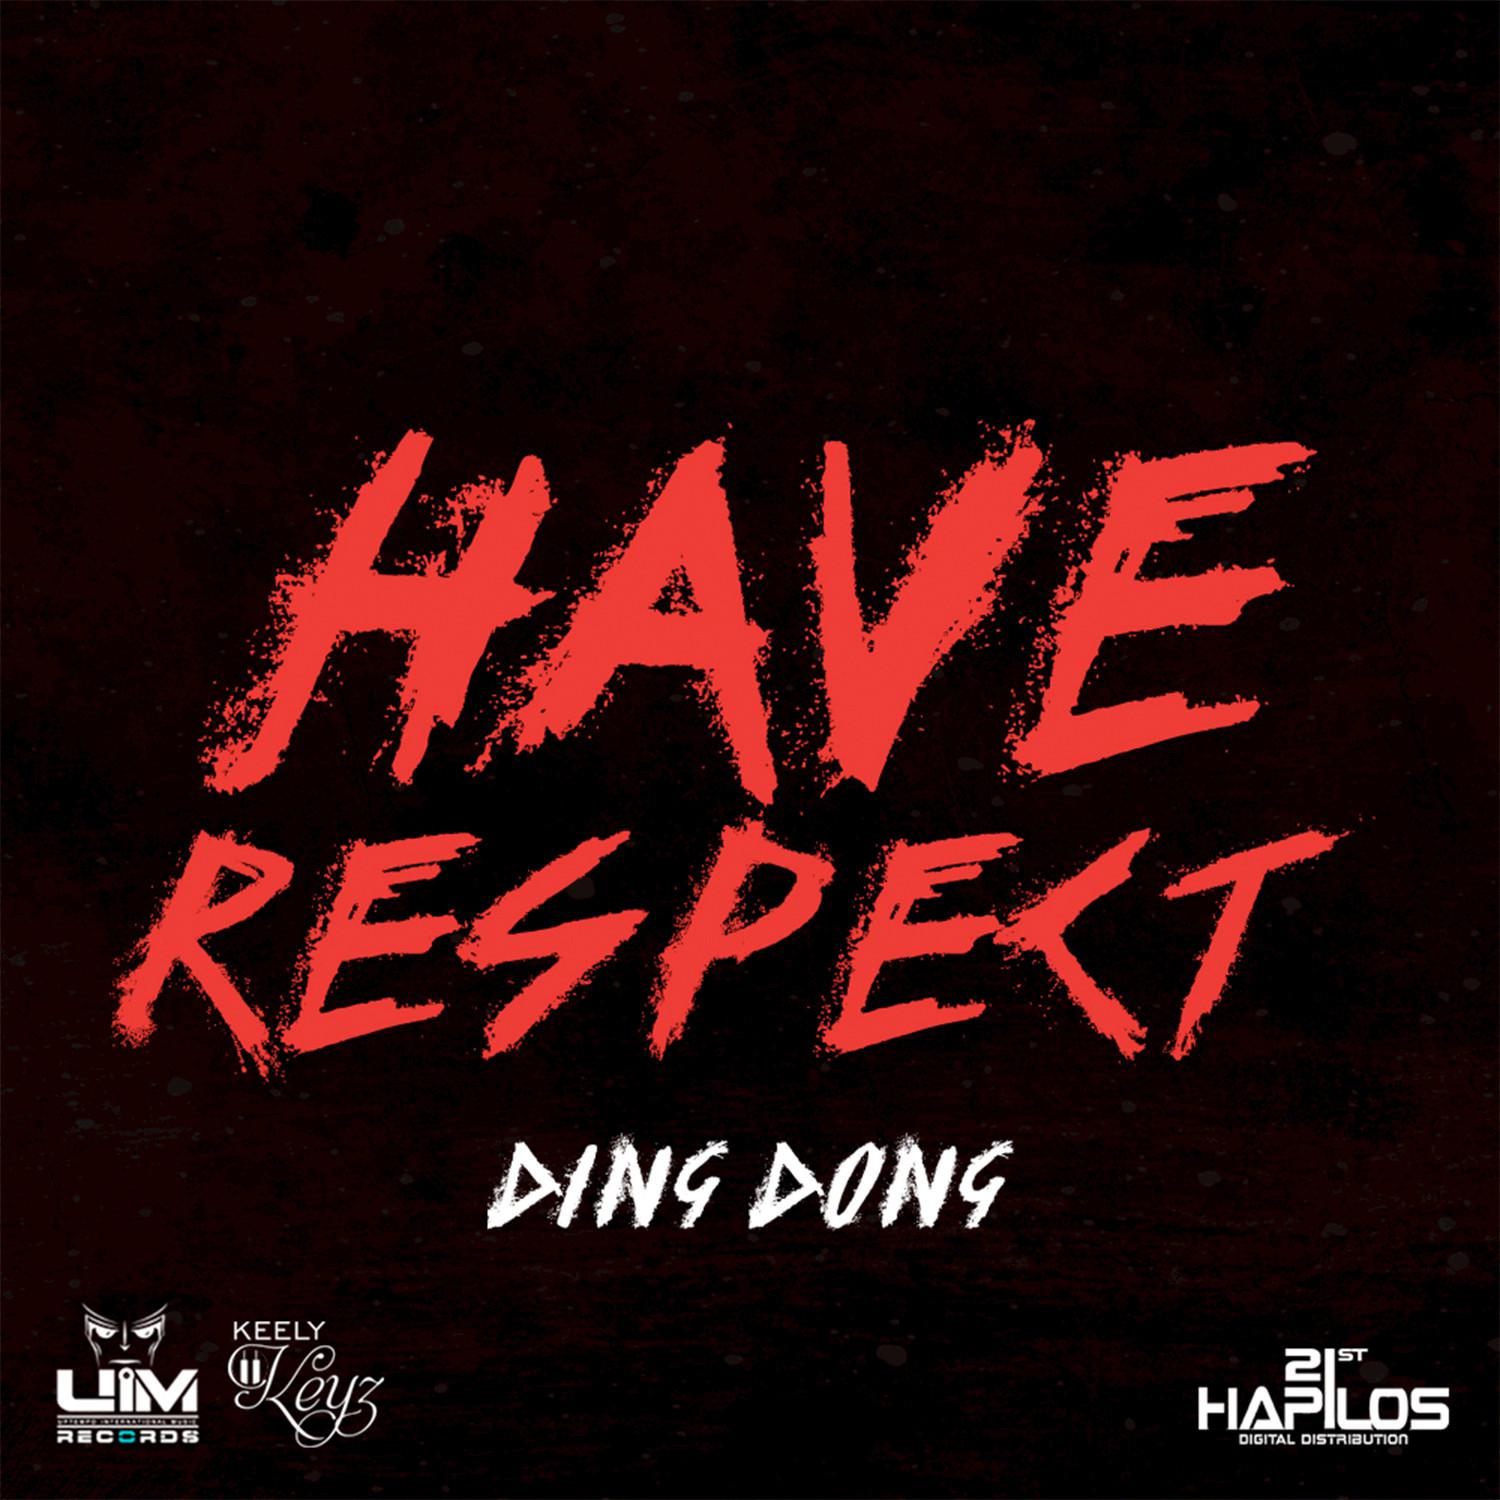 Have Respect - Single